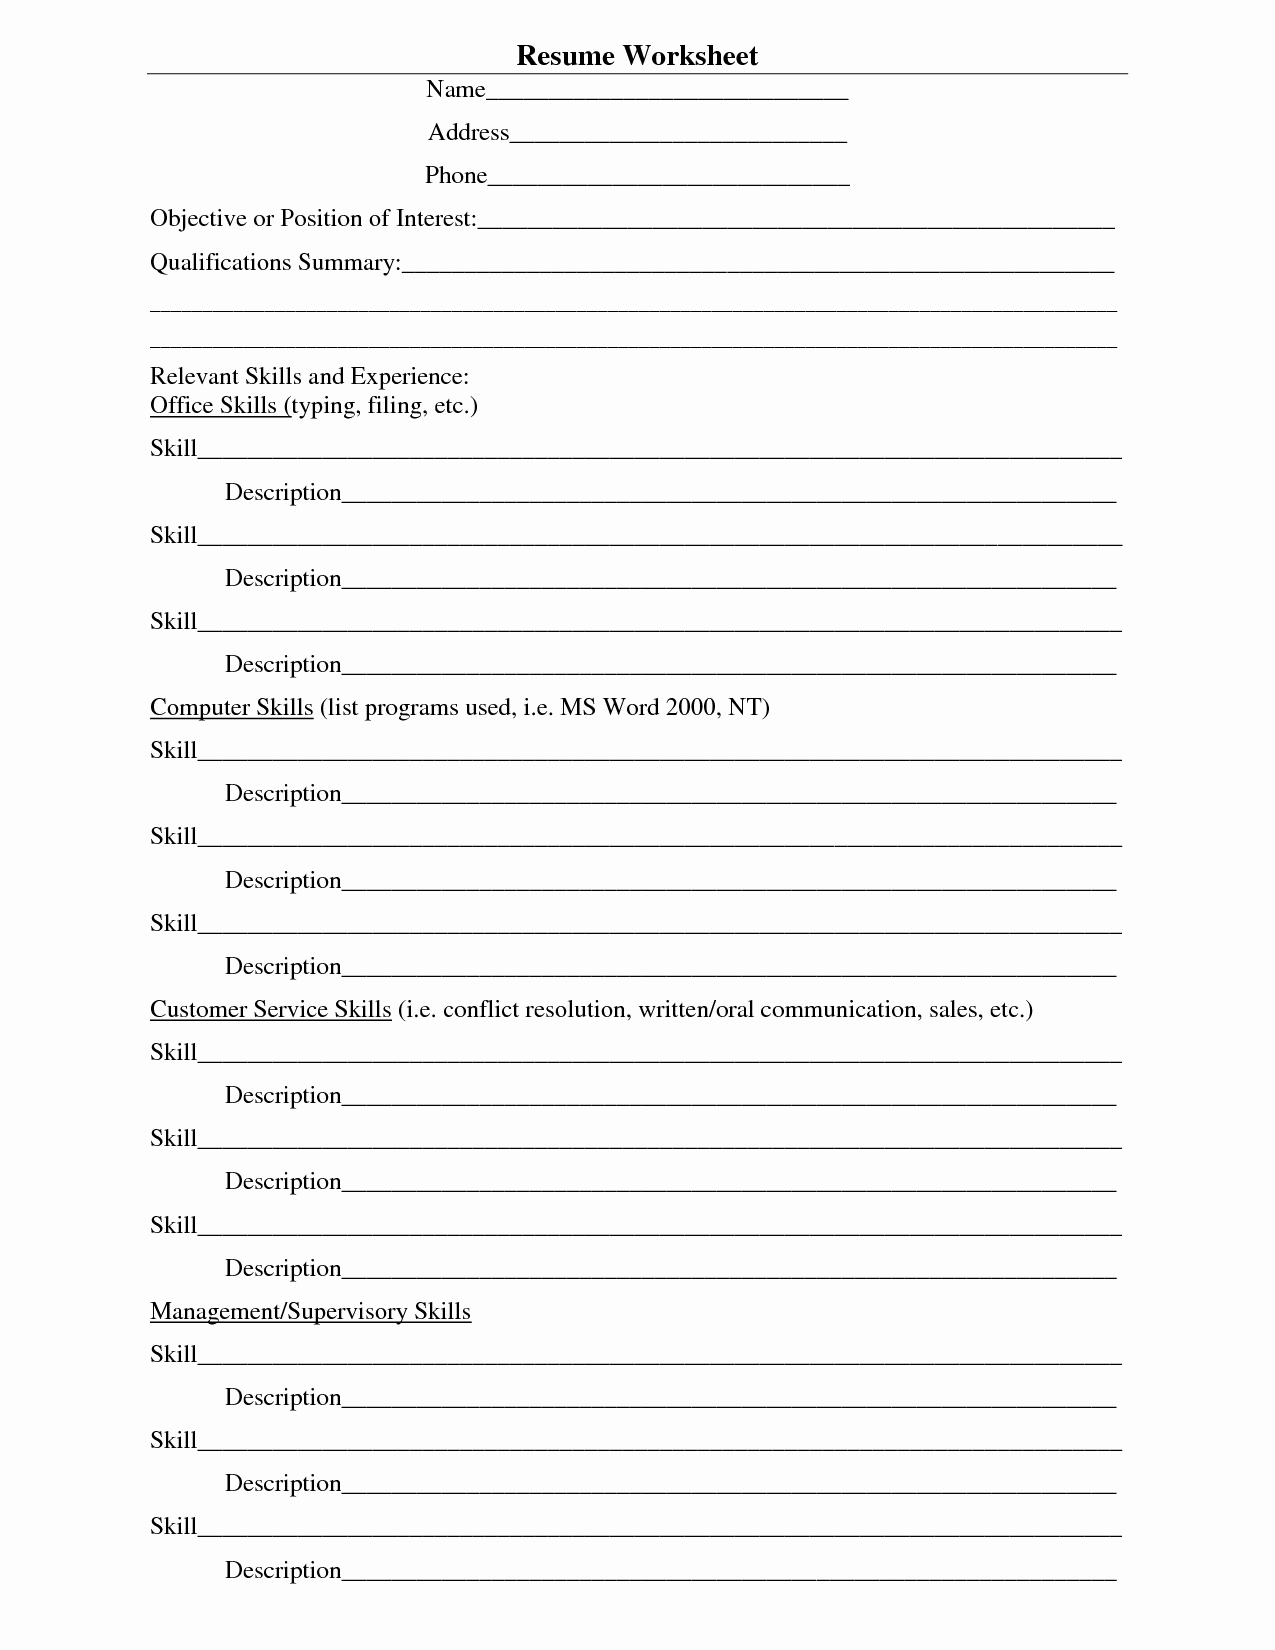 Resume Worksheet for Adults New 19 Best Of High School Student Information